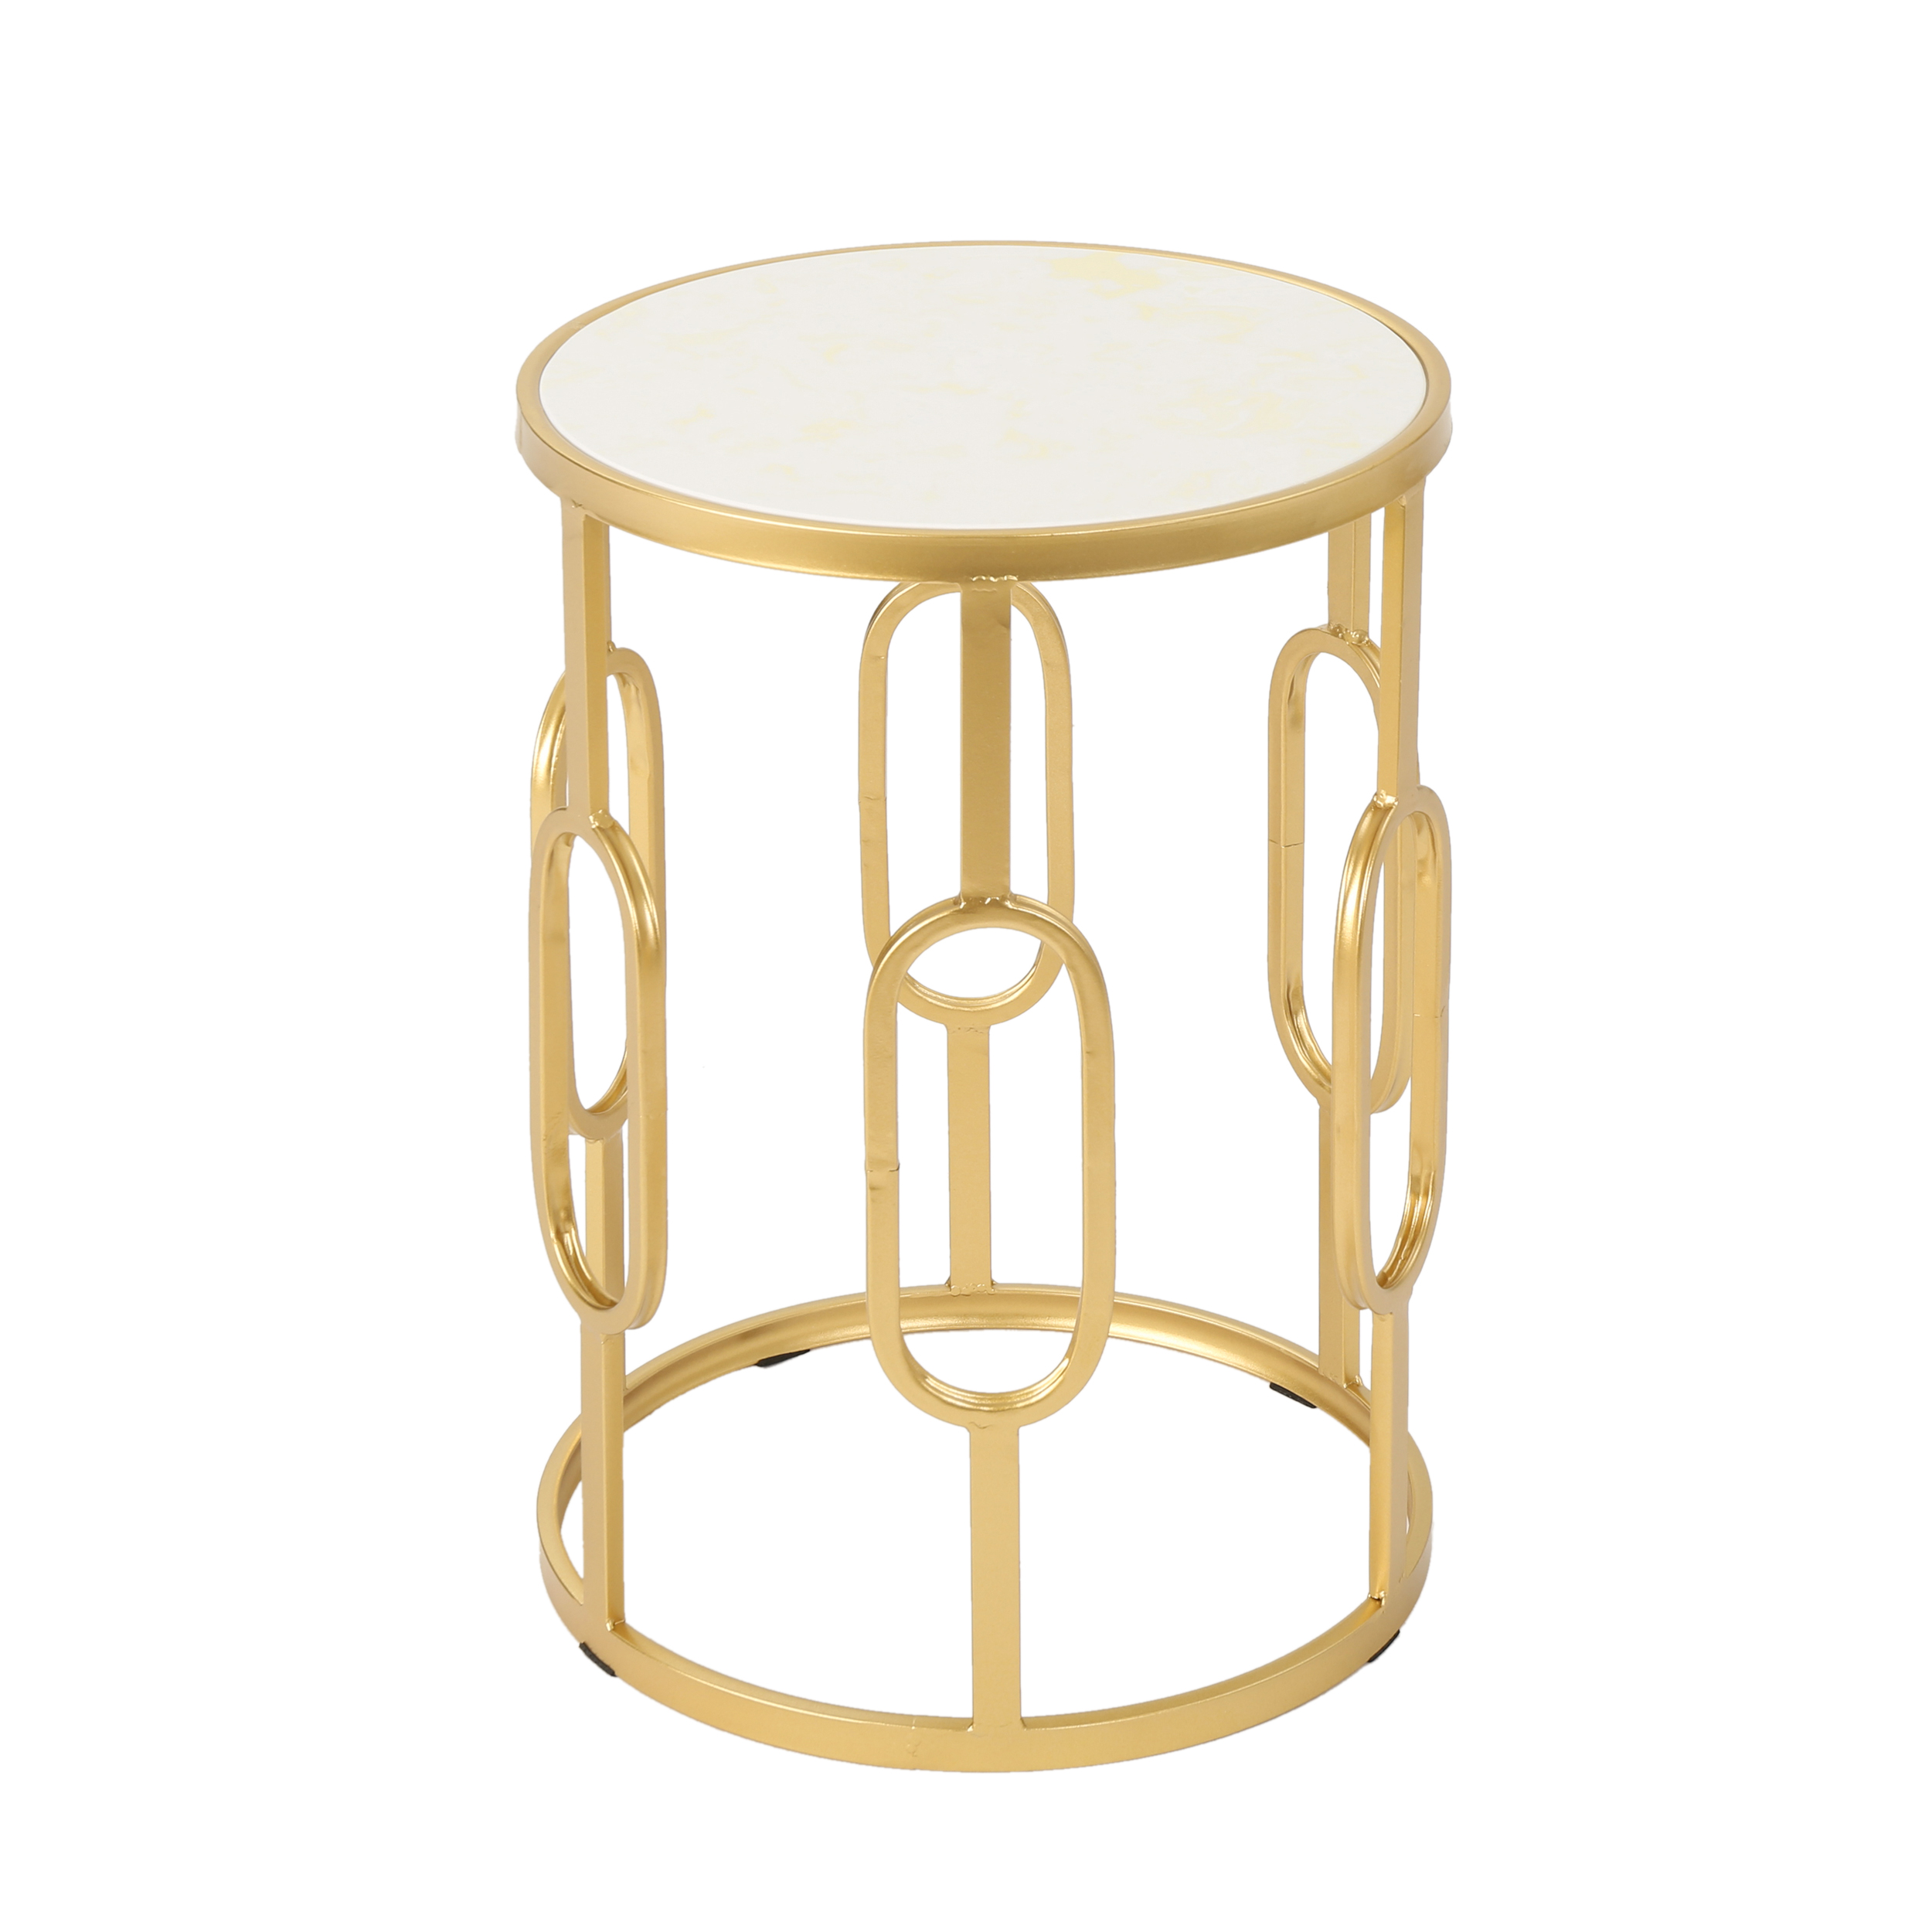 Madison Indoor Glam 16 Inch Side Table, White Finish Faux Stone - image 1 of 7